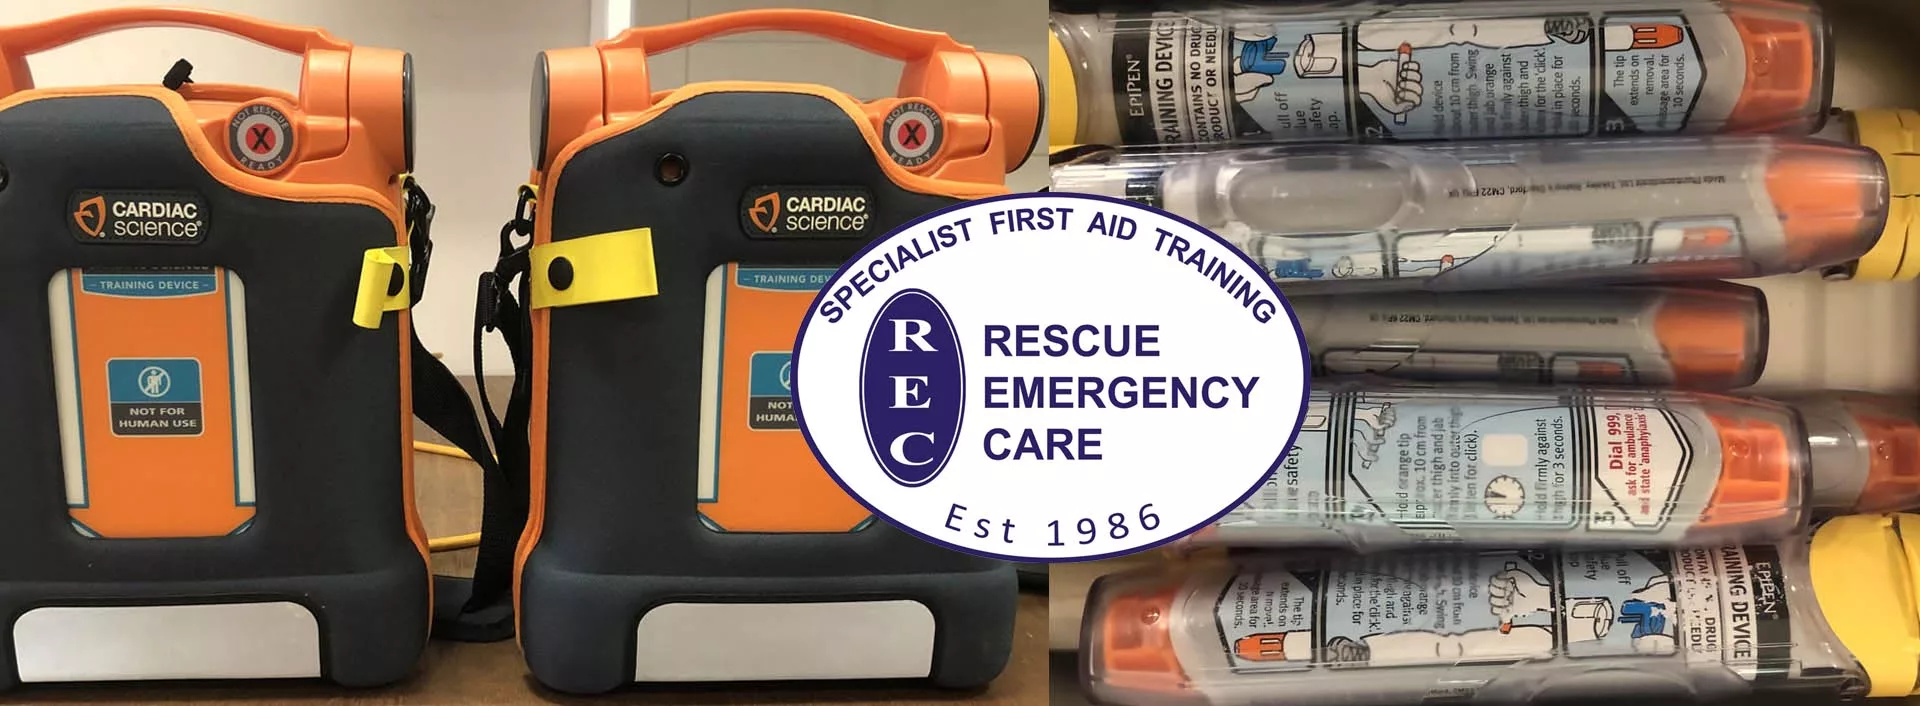 Rescue Emergency Care First Aid Course Equipment